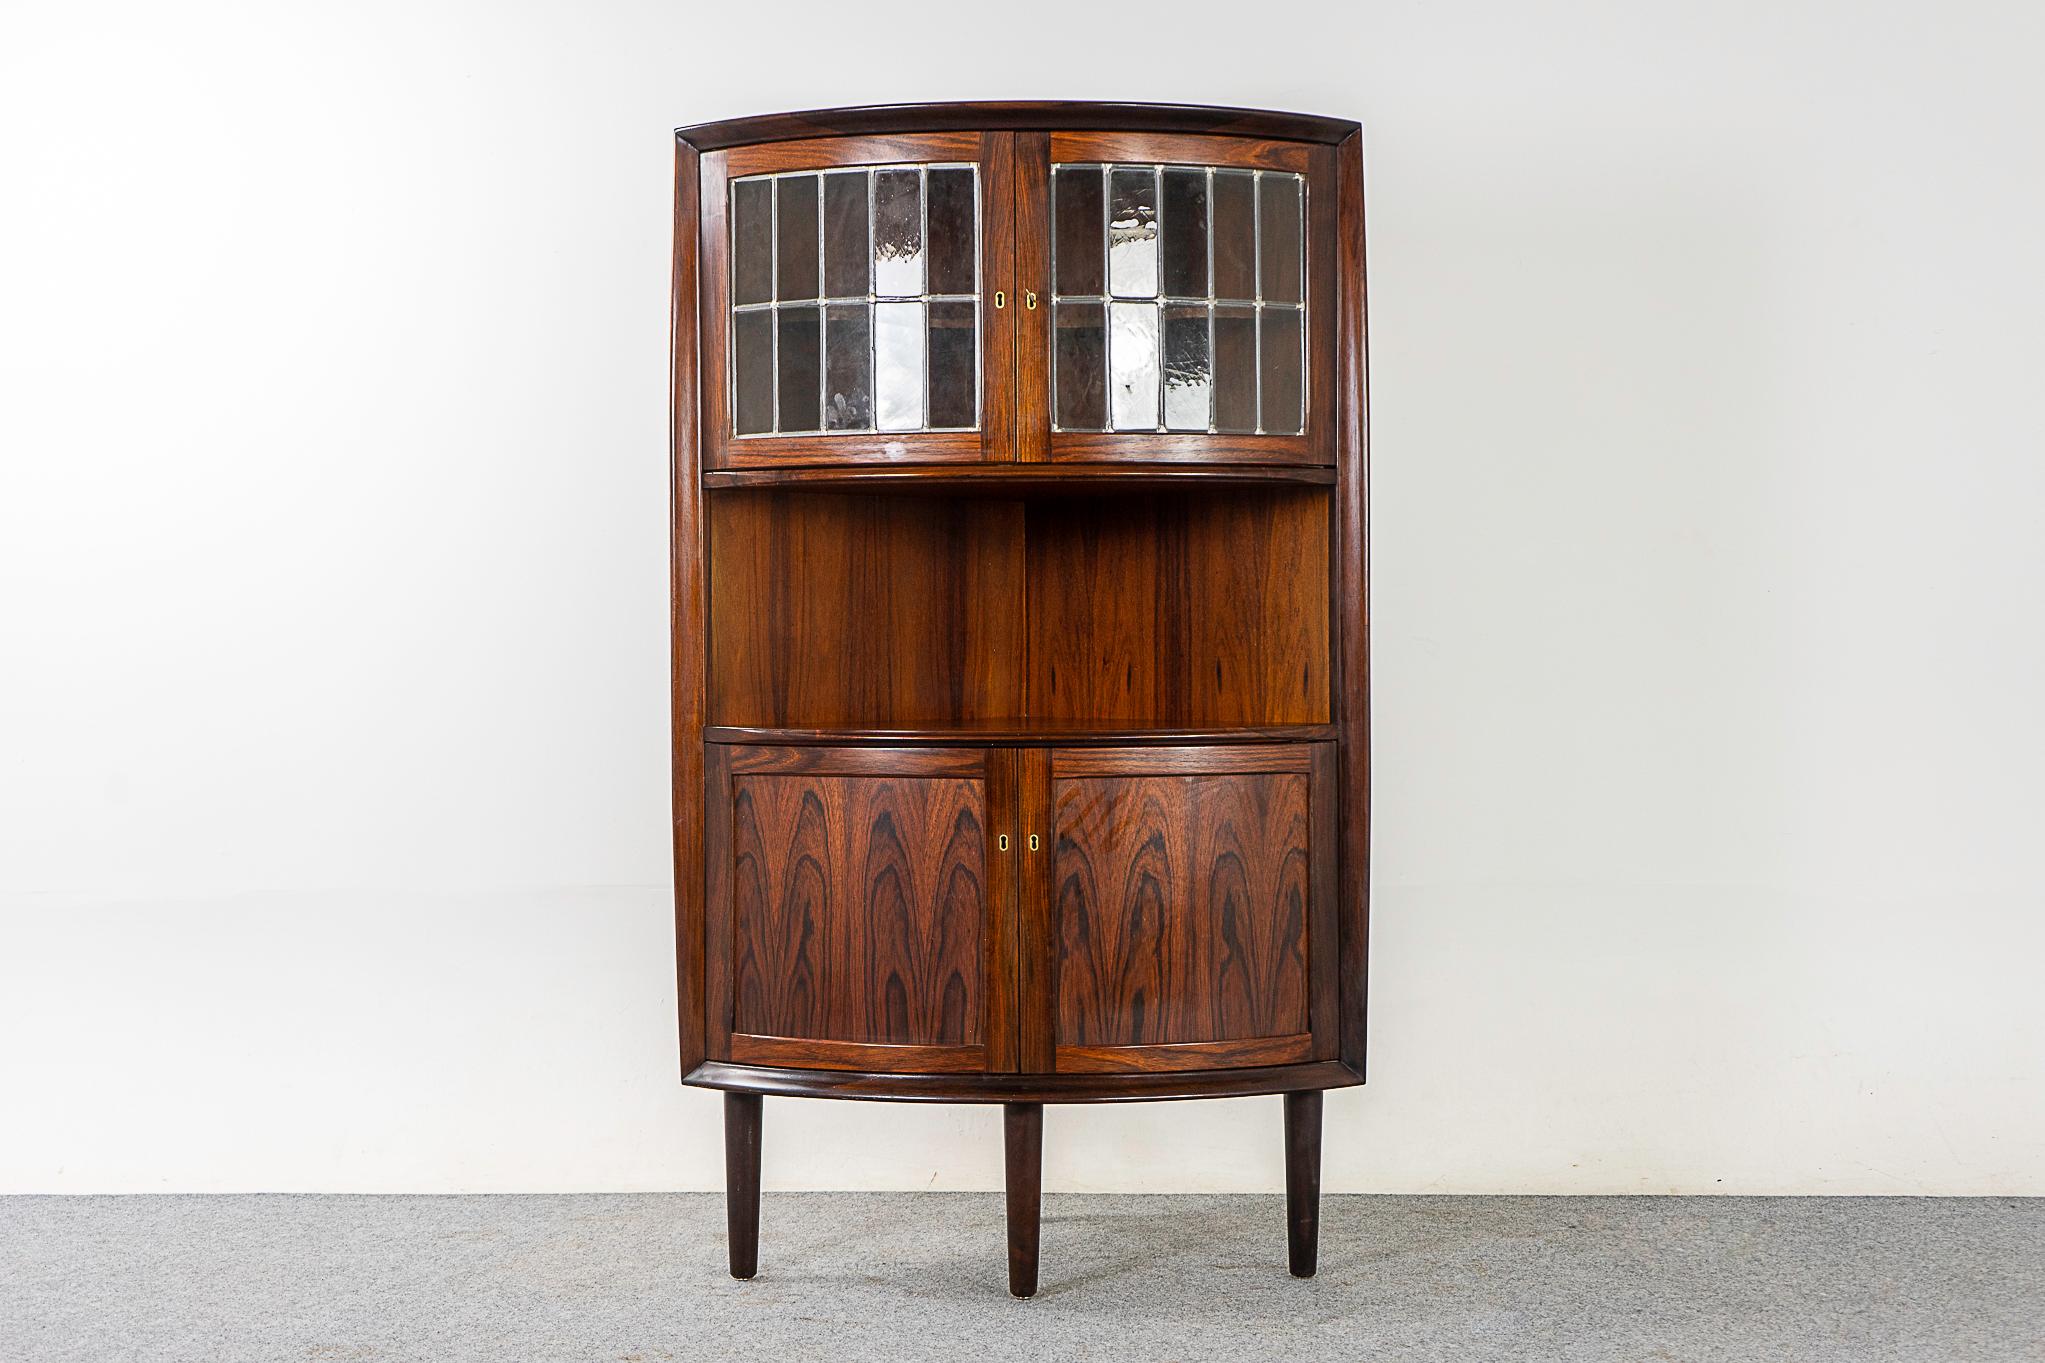 Rosewood & glass Danish modern corner cabinet, circa 1960s. Unique locking cabinet with round profile and figurative veneer throughout. Hide away clutter, show off your fancy vintage cocktail glasses and barware! Make mine a double - we have a pair